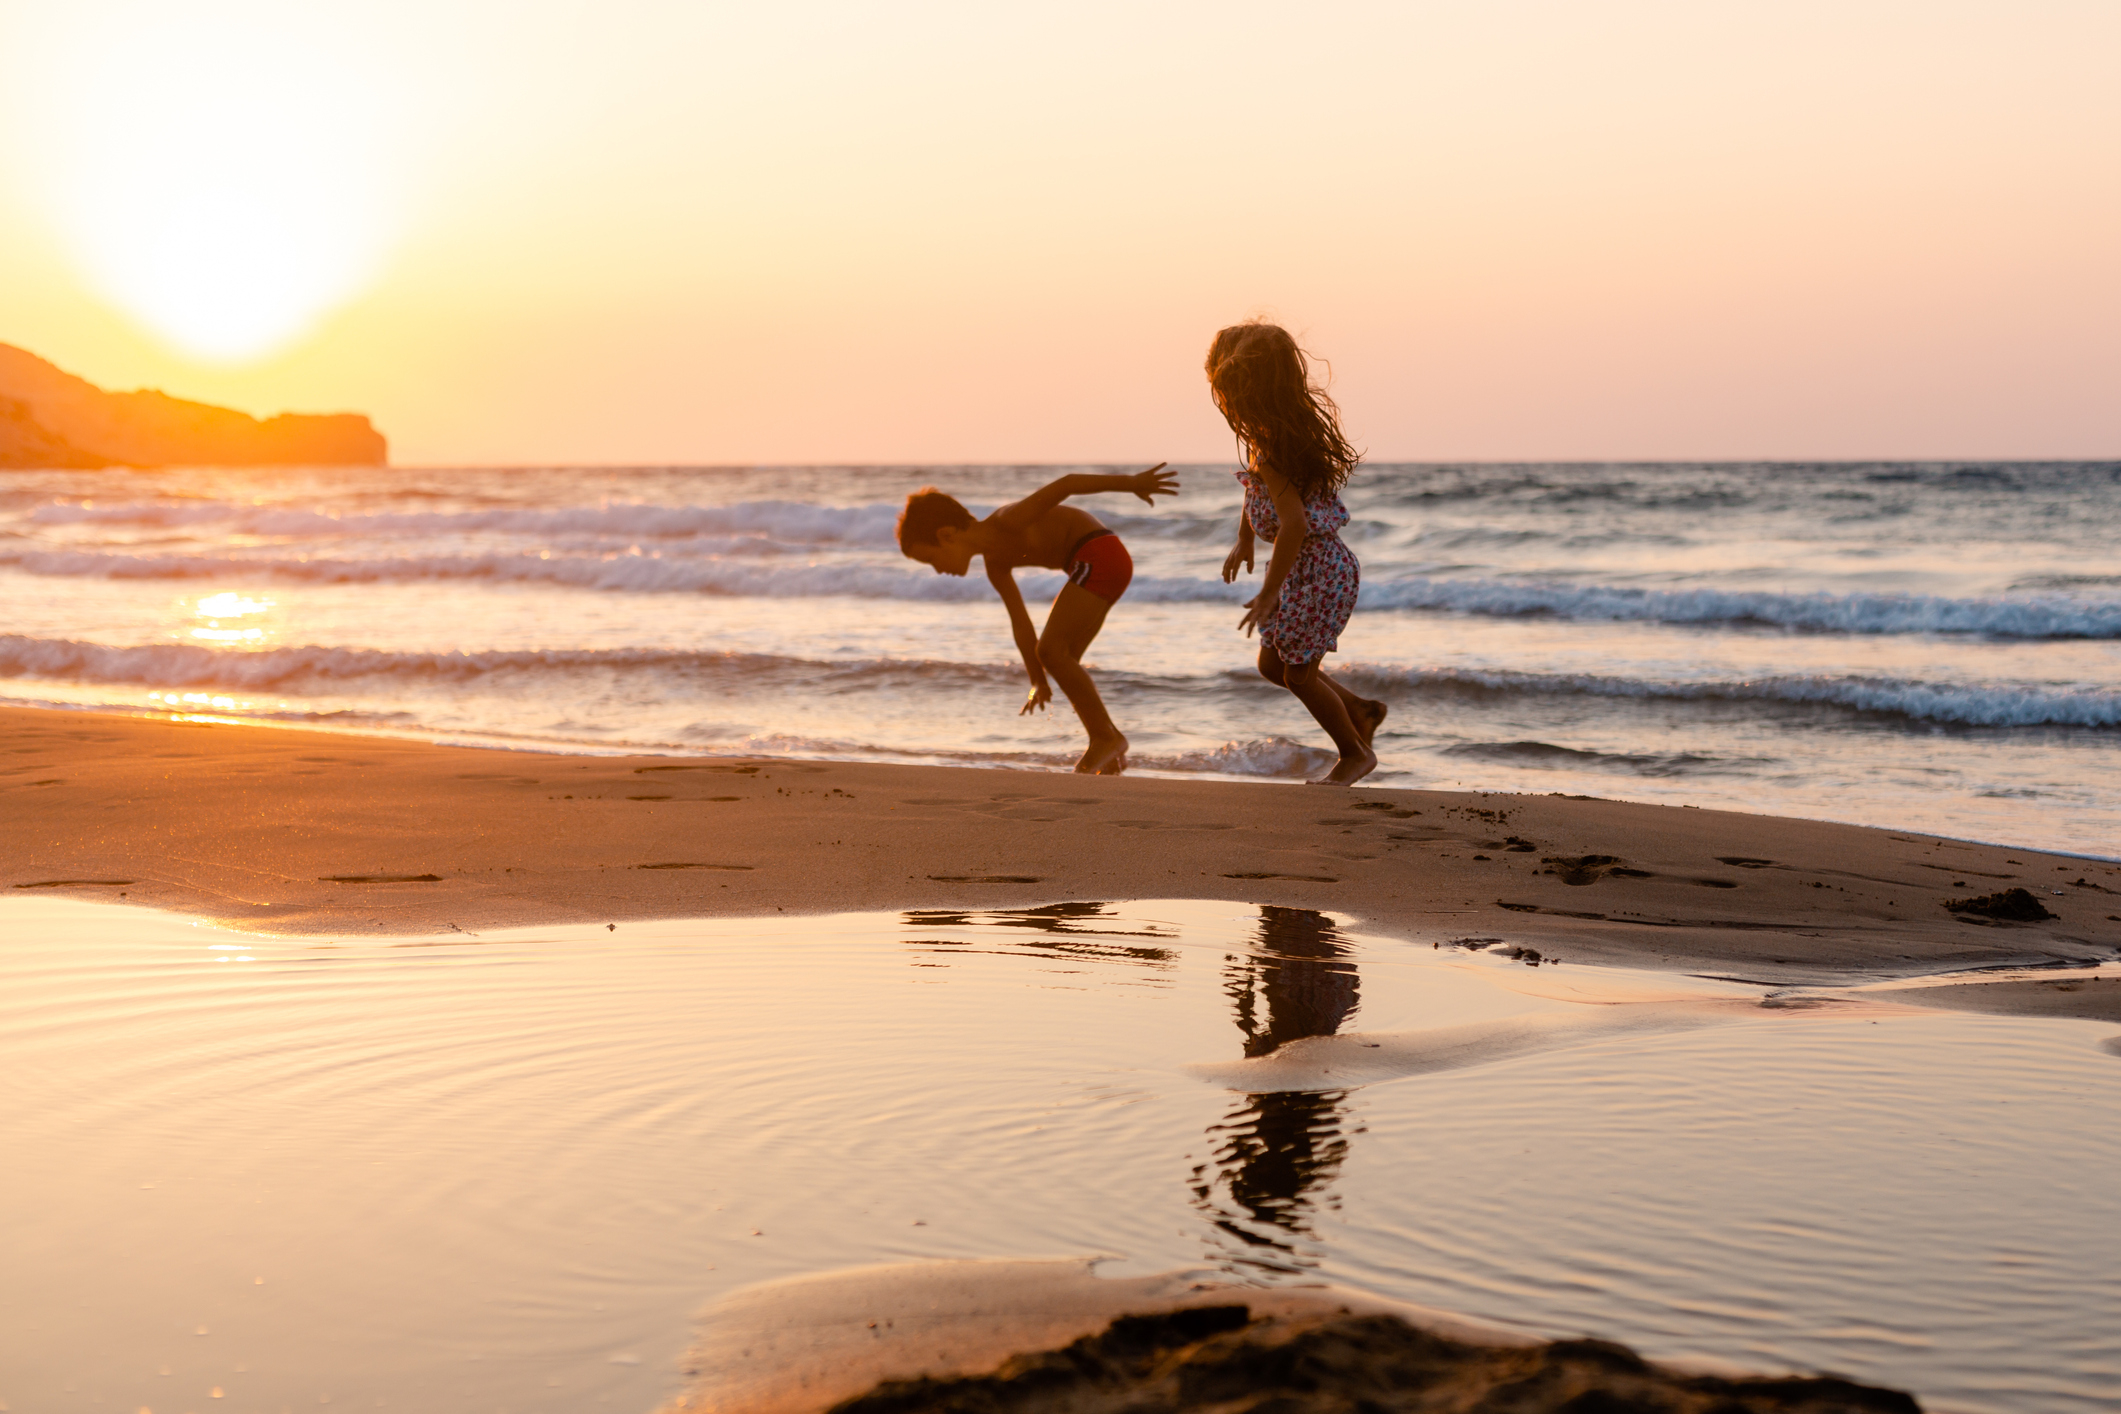 Cheerful children playing on the beach on a beautiful sunset